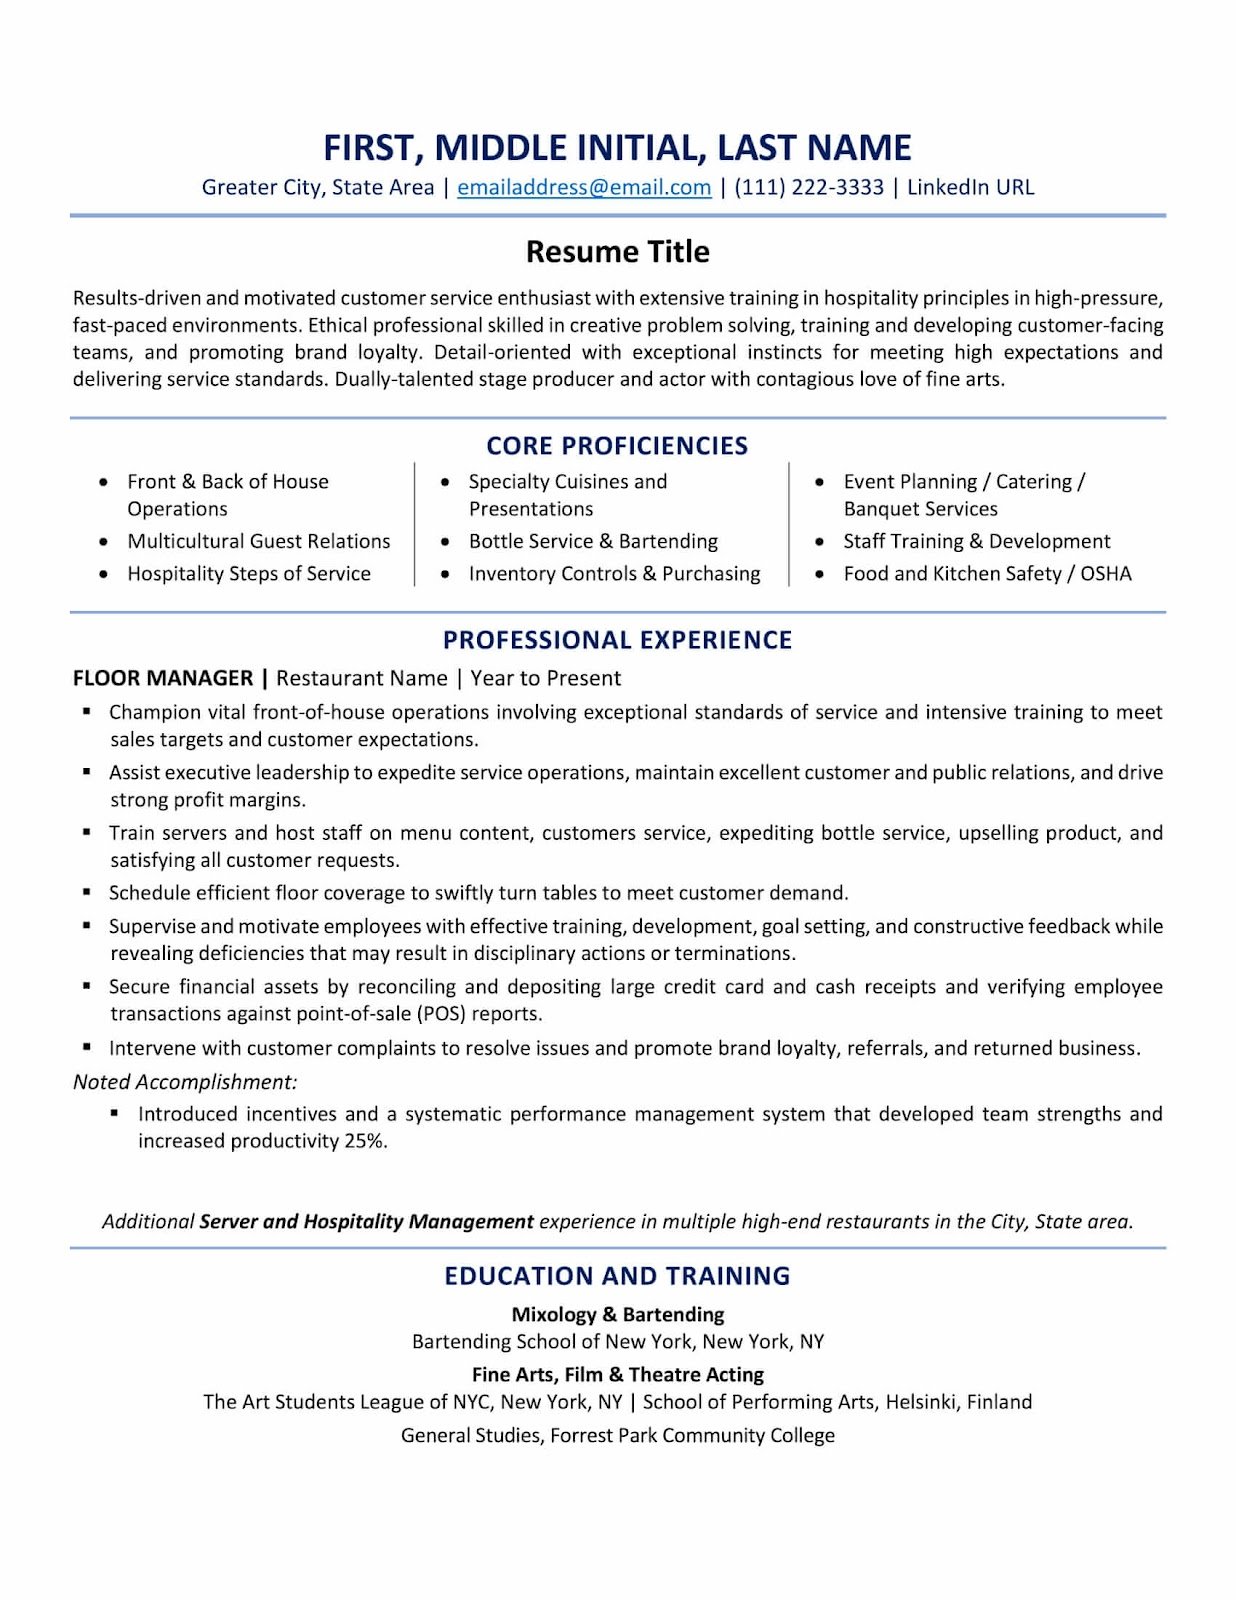 USA Resume Format: Best Tips and Examples (Updated)